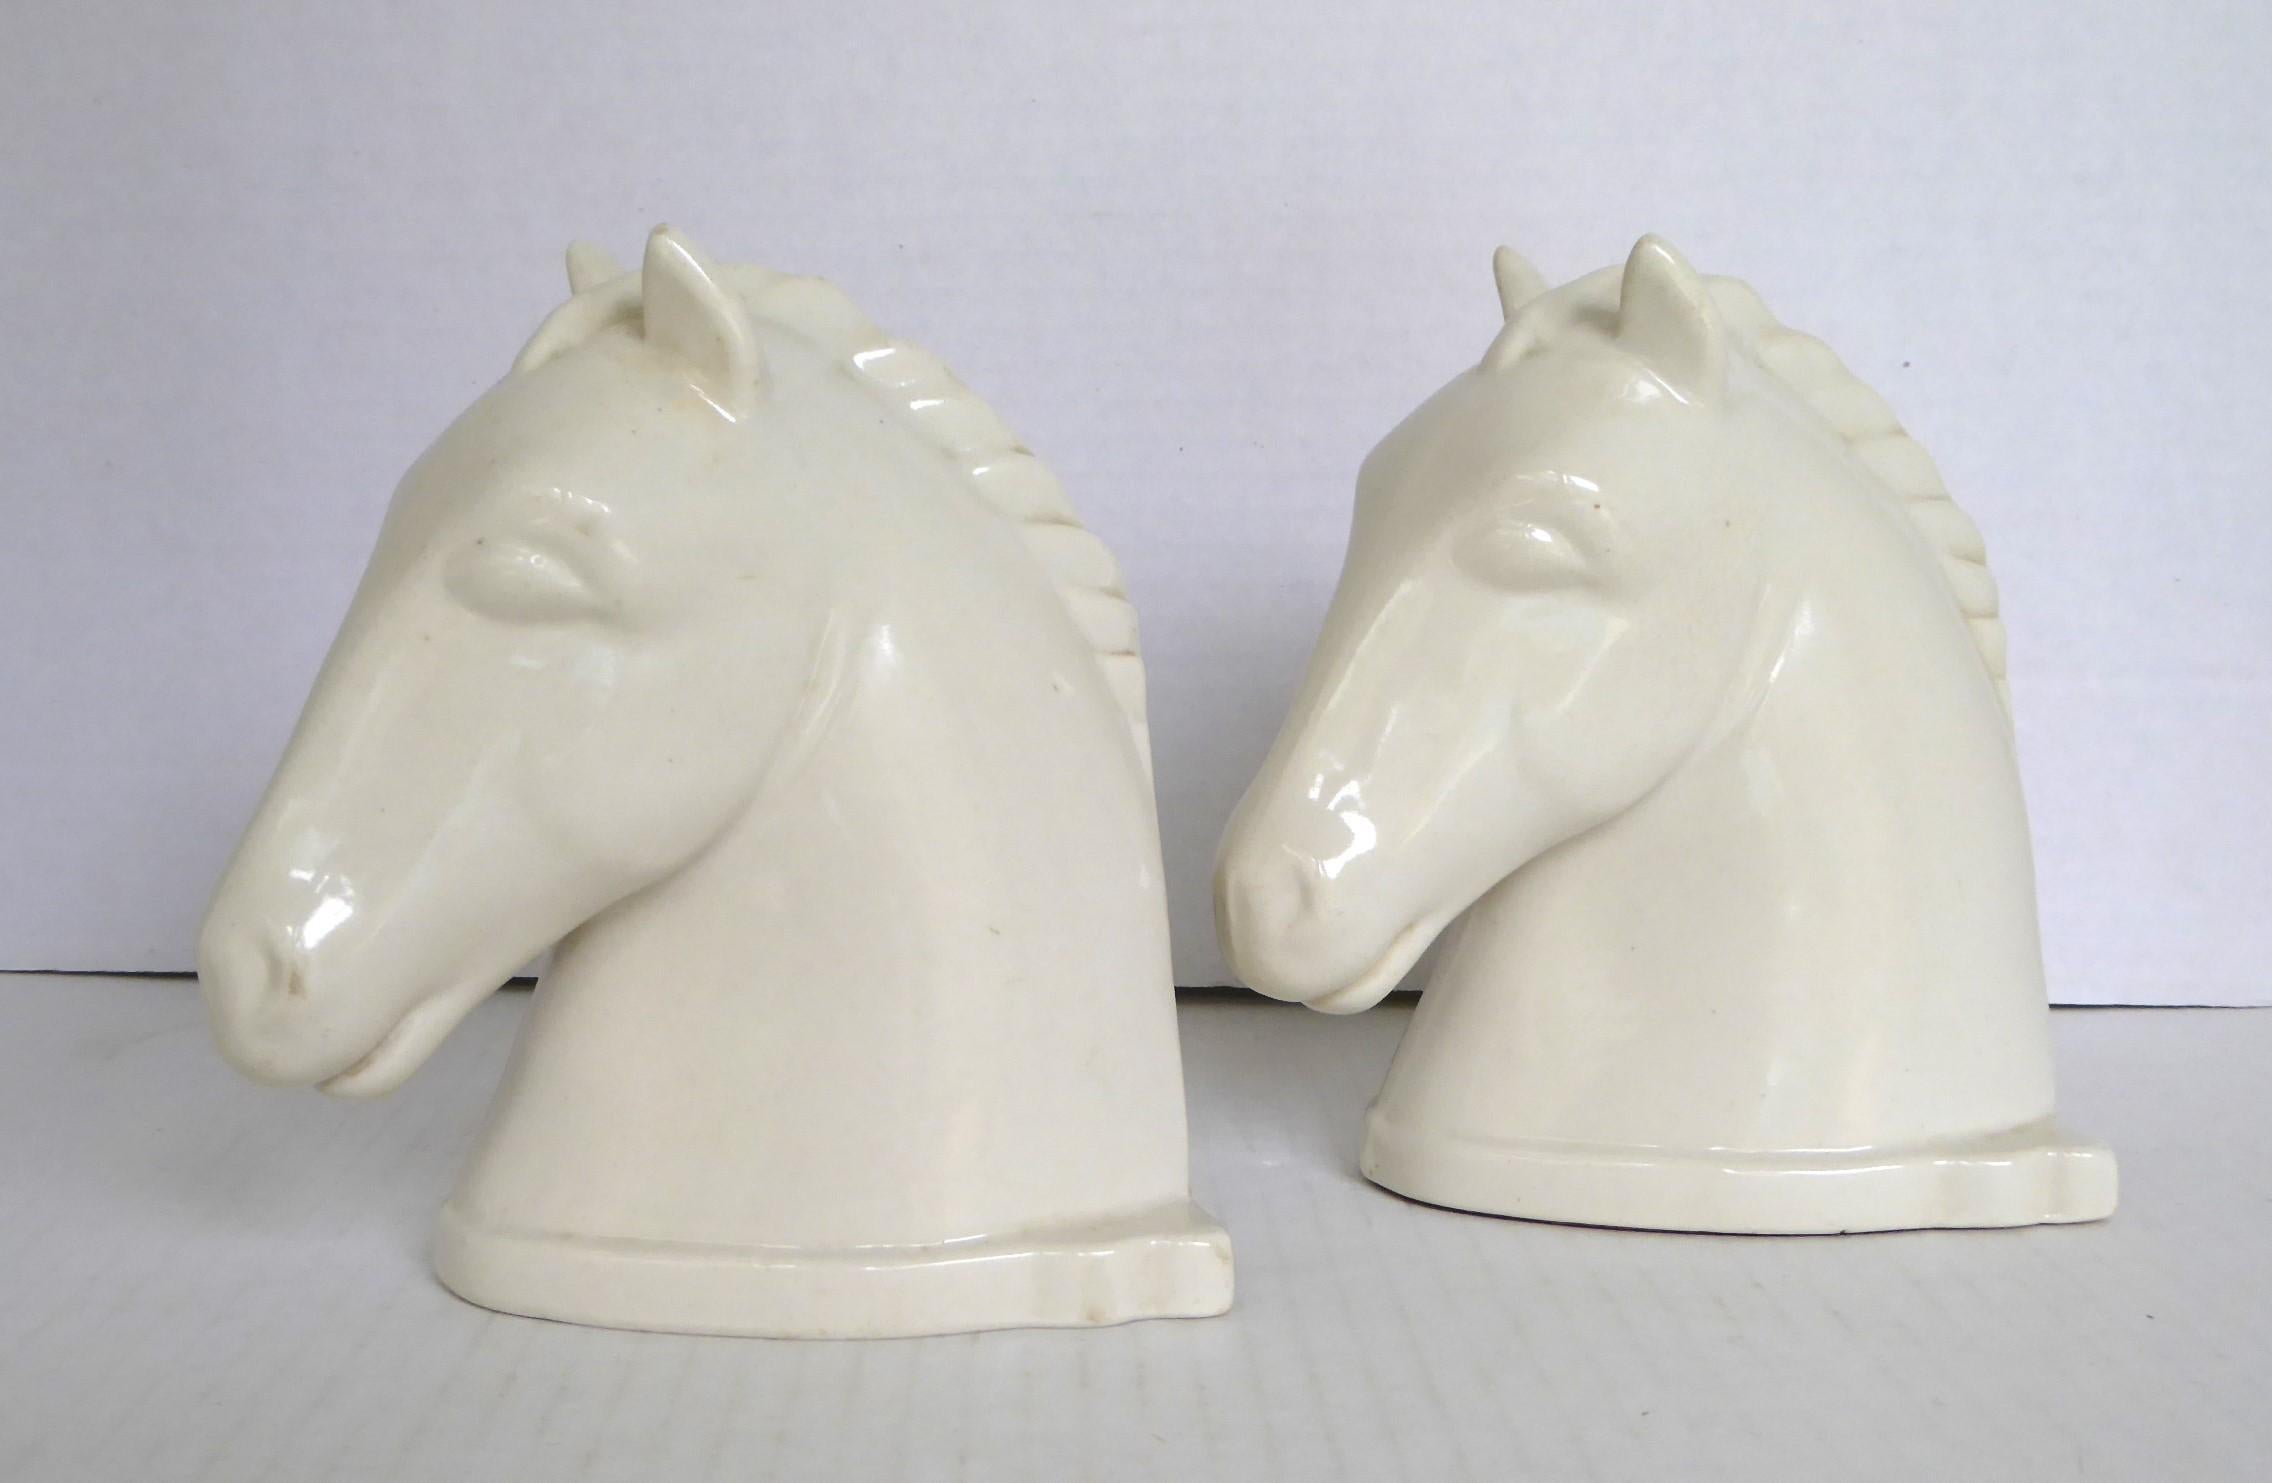 white horse bookends